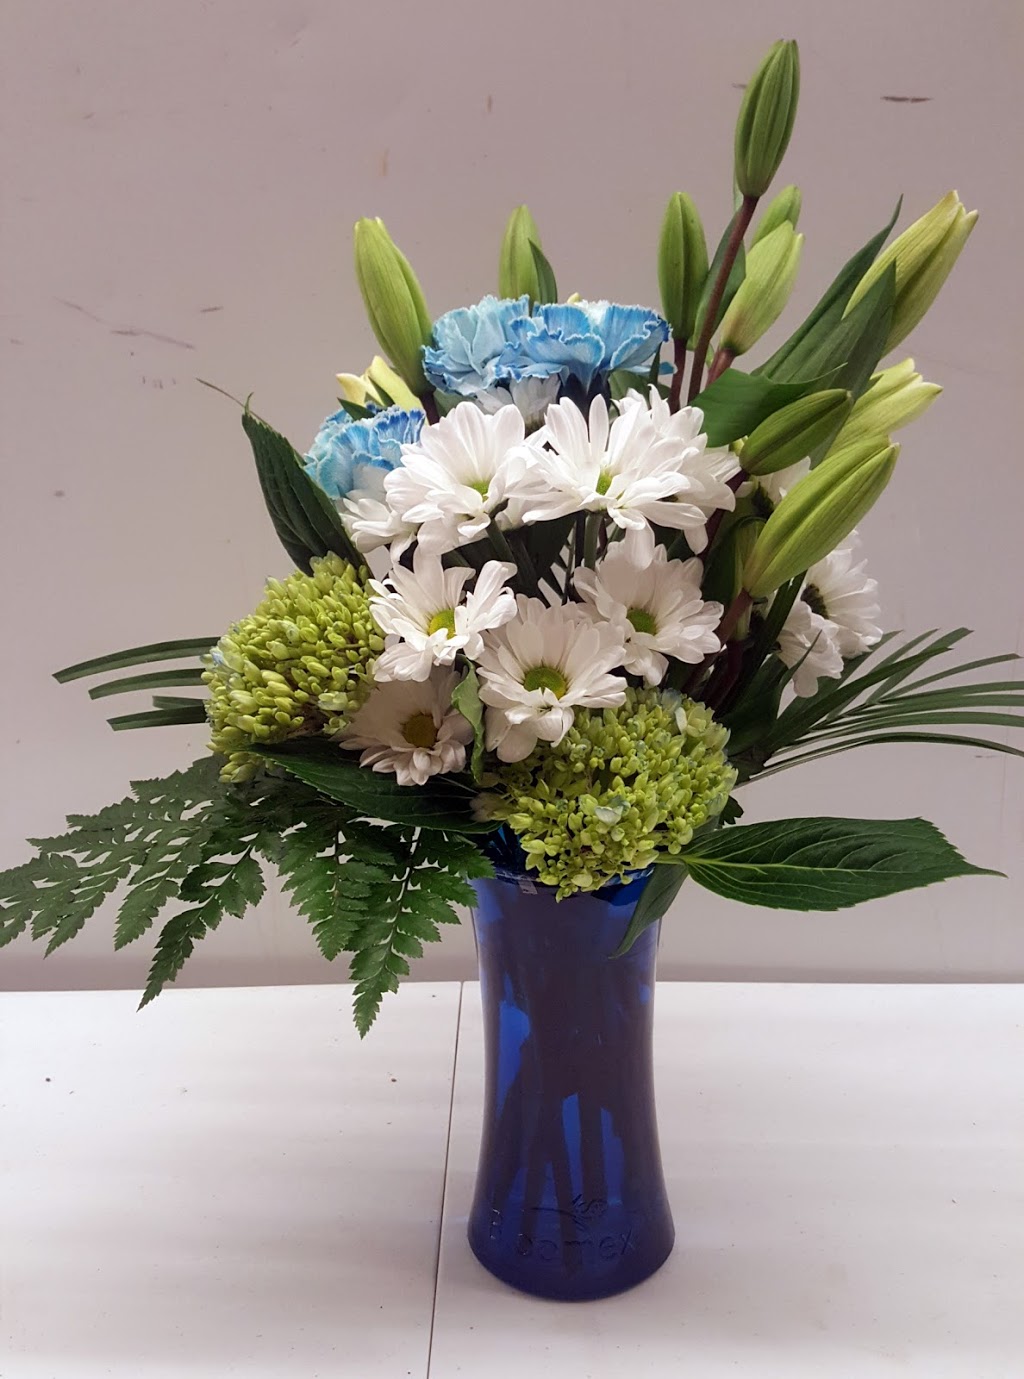 Bloomex Melbourne Flowers & Gift Hampers 6 Ely Ct